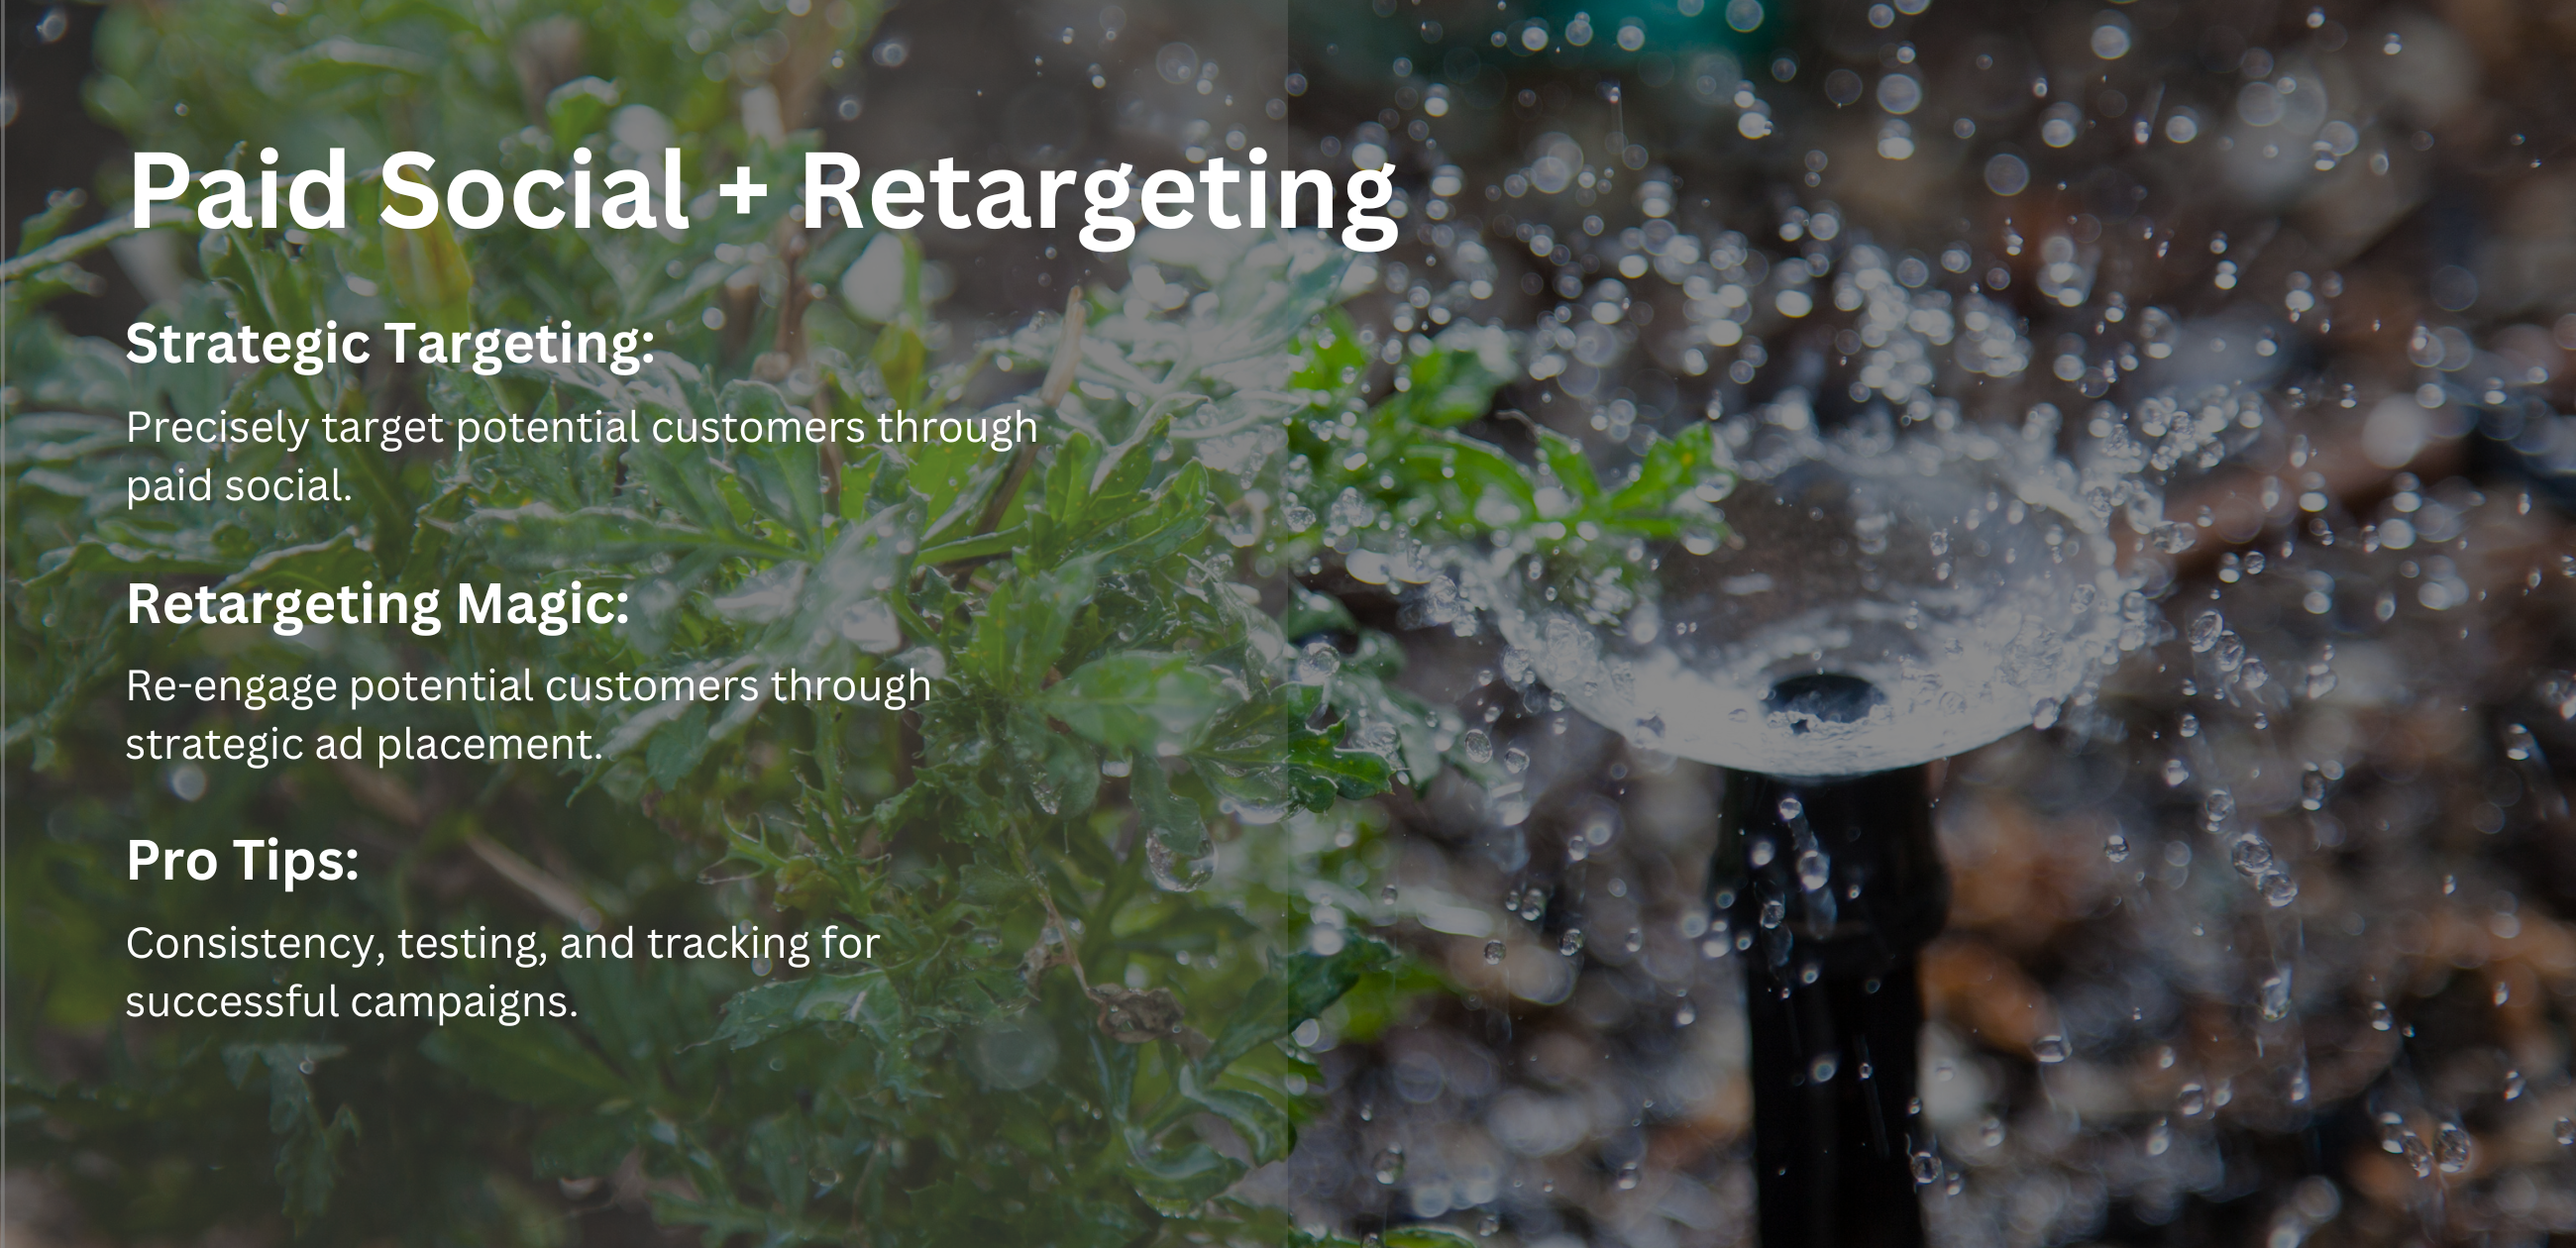 Paid Social + Retargeting: Engaging Your Audience Where They Are